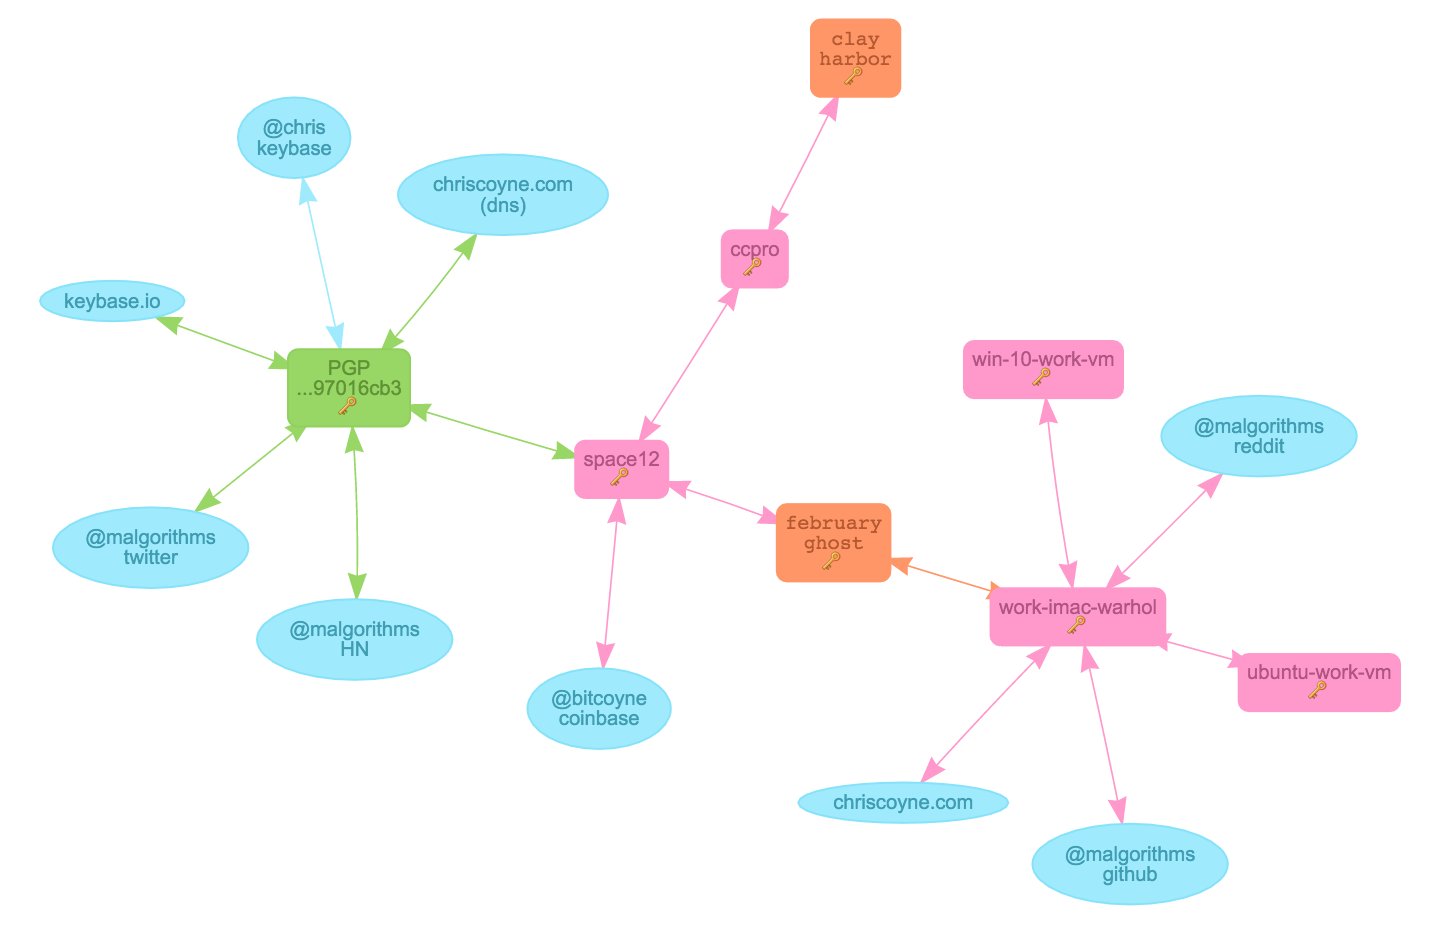 devices in pink and orange have decryption keys nodes in blue are assertions you might make